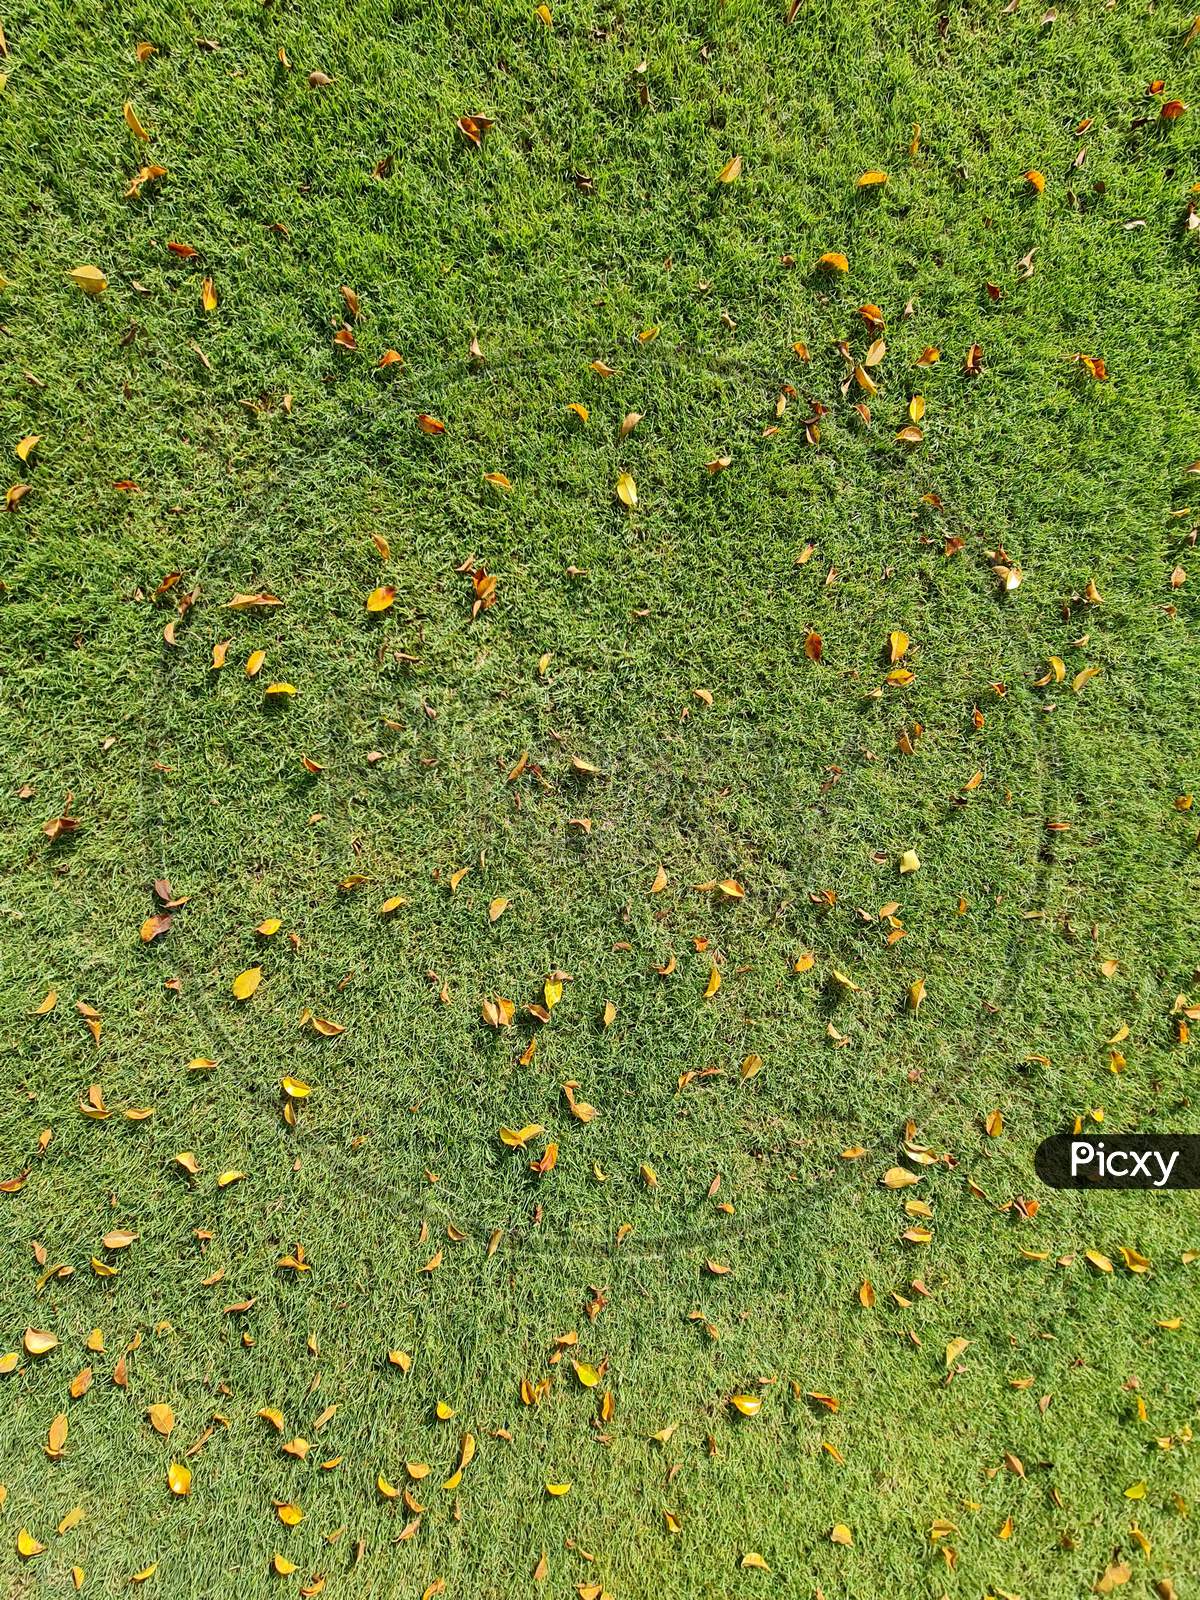 Natural Green Grass Texture With Dry Fallen Leaves. Grass Lawn From Top View.